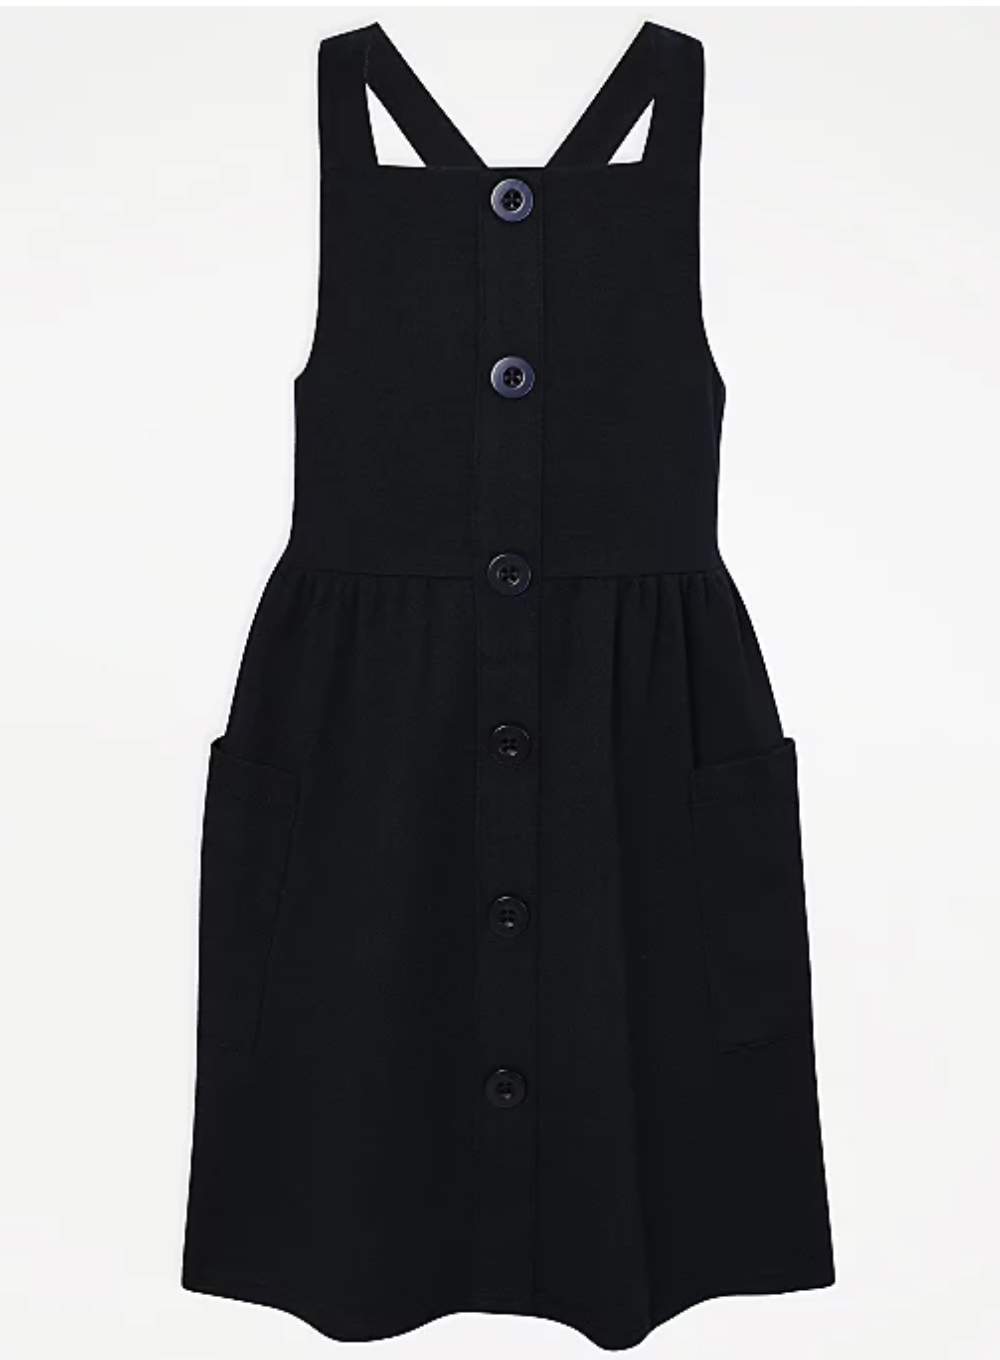 Girls' Navy Sleeveless Jersey Pinafore Dress, Square Neckline, Front Pockets, 6-7 Y